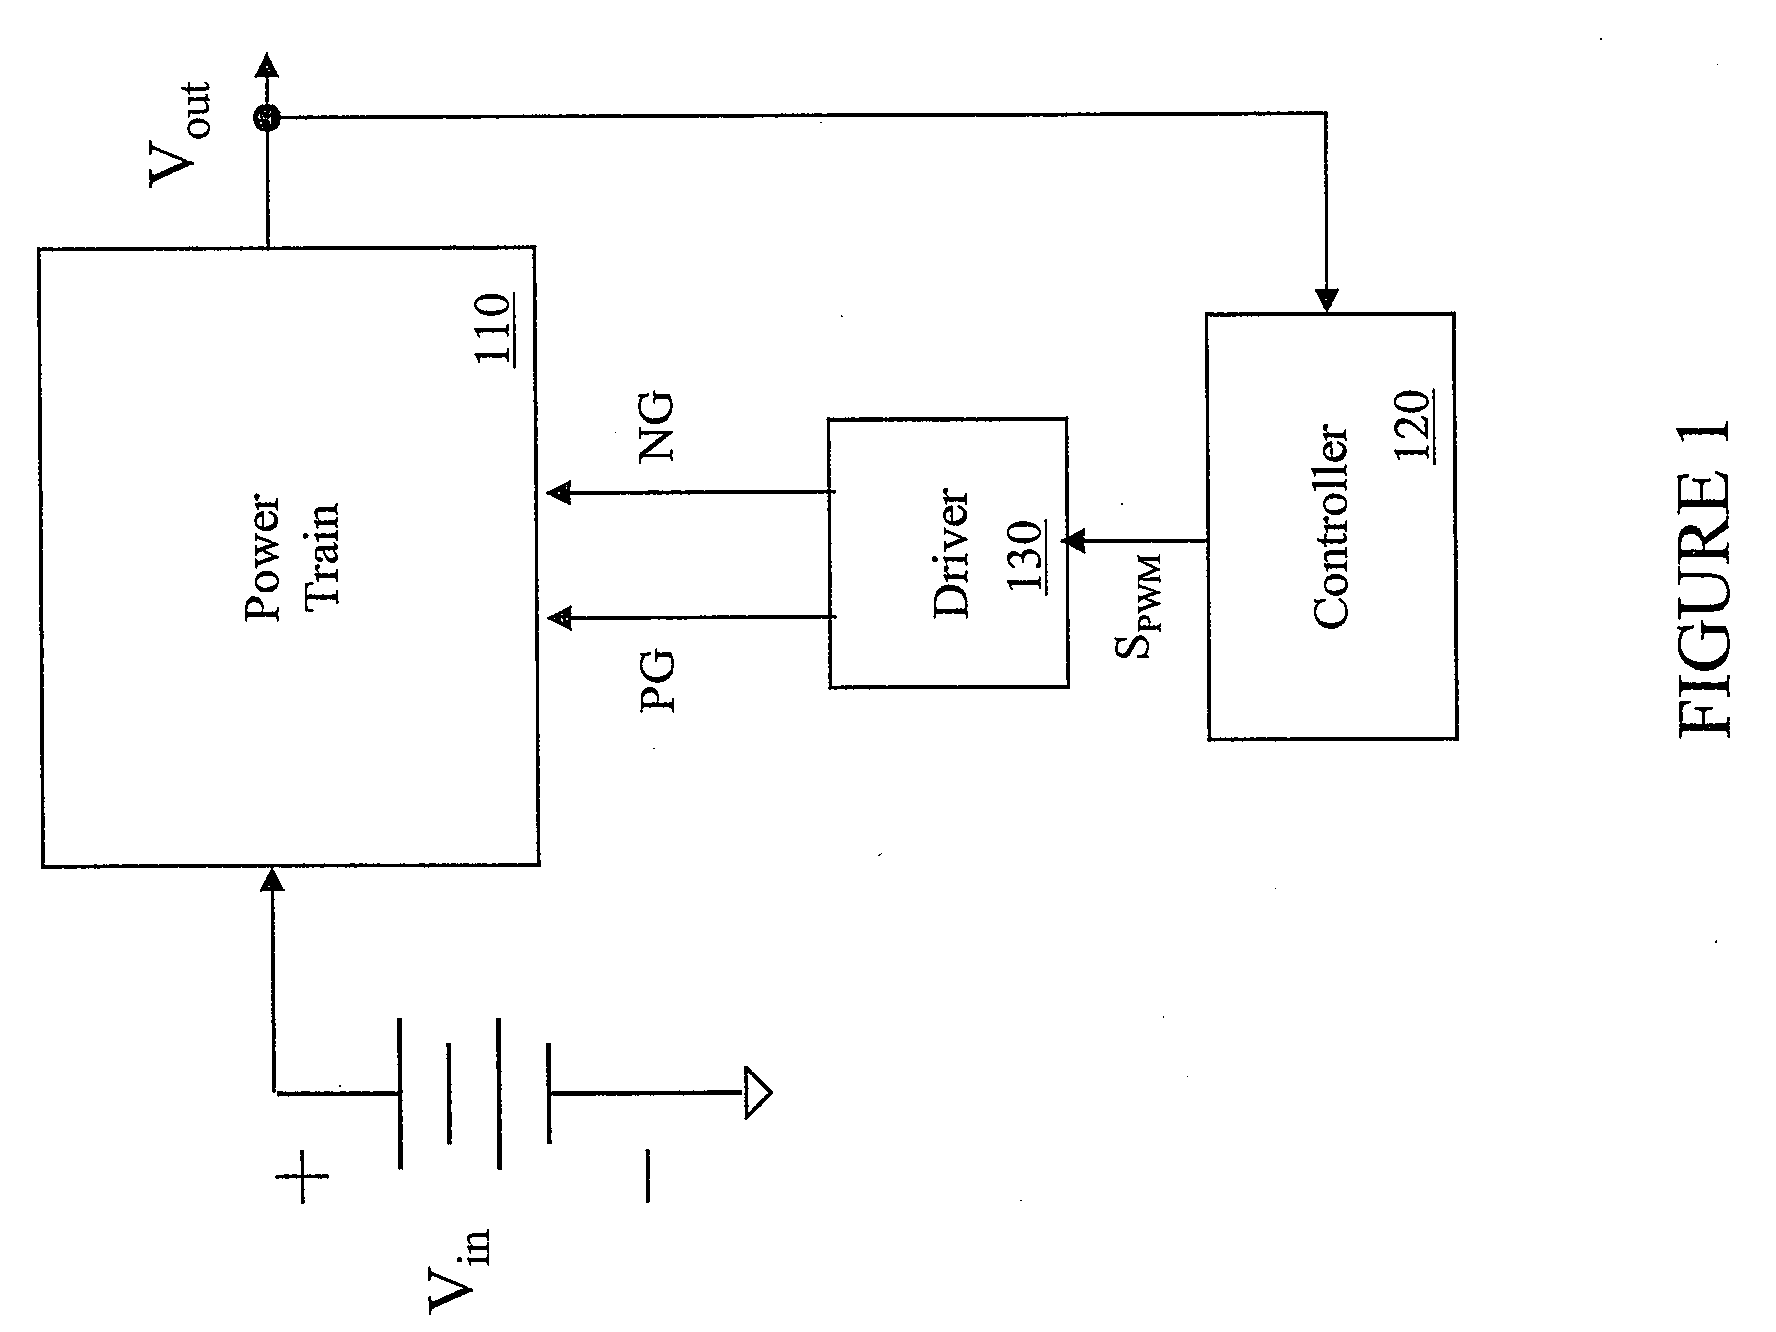 Method of Forming a Micromagnetic Device